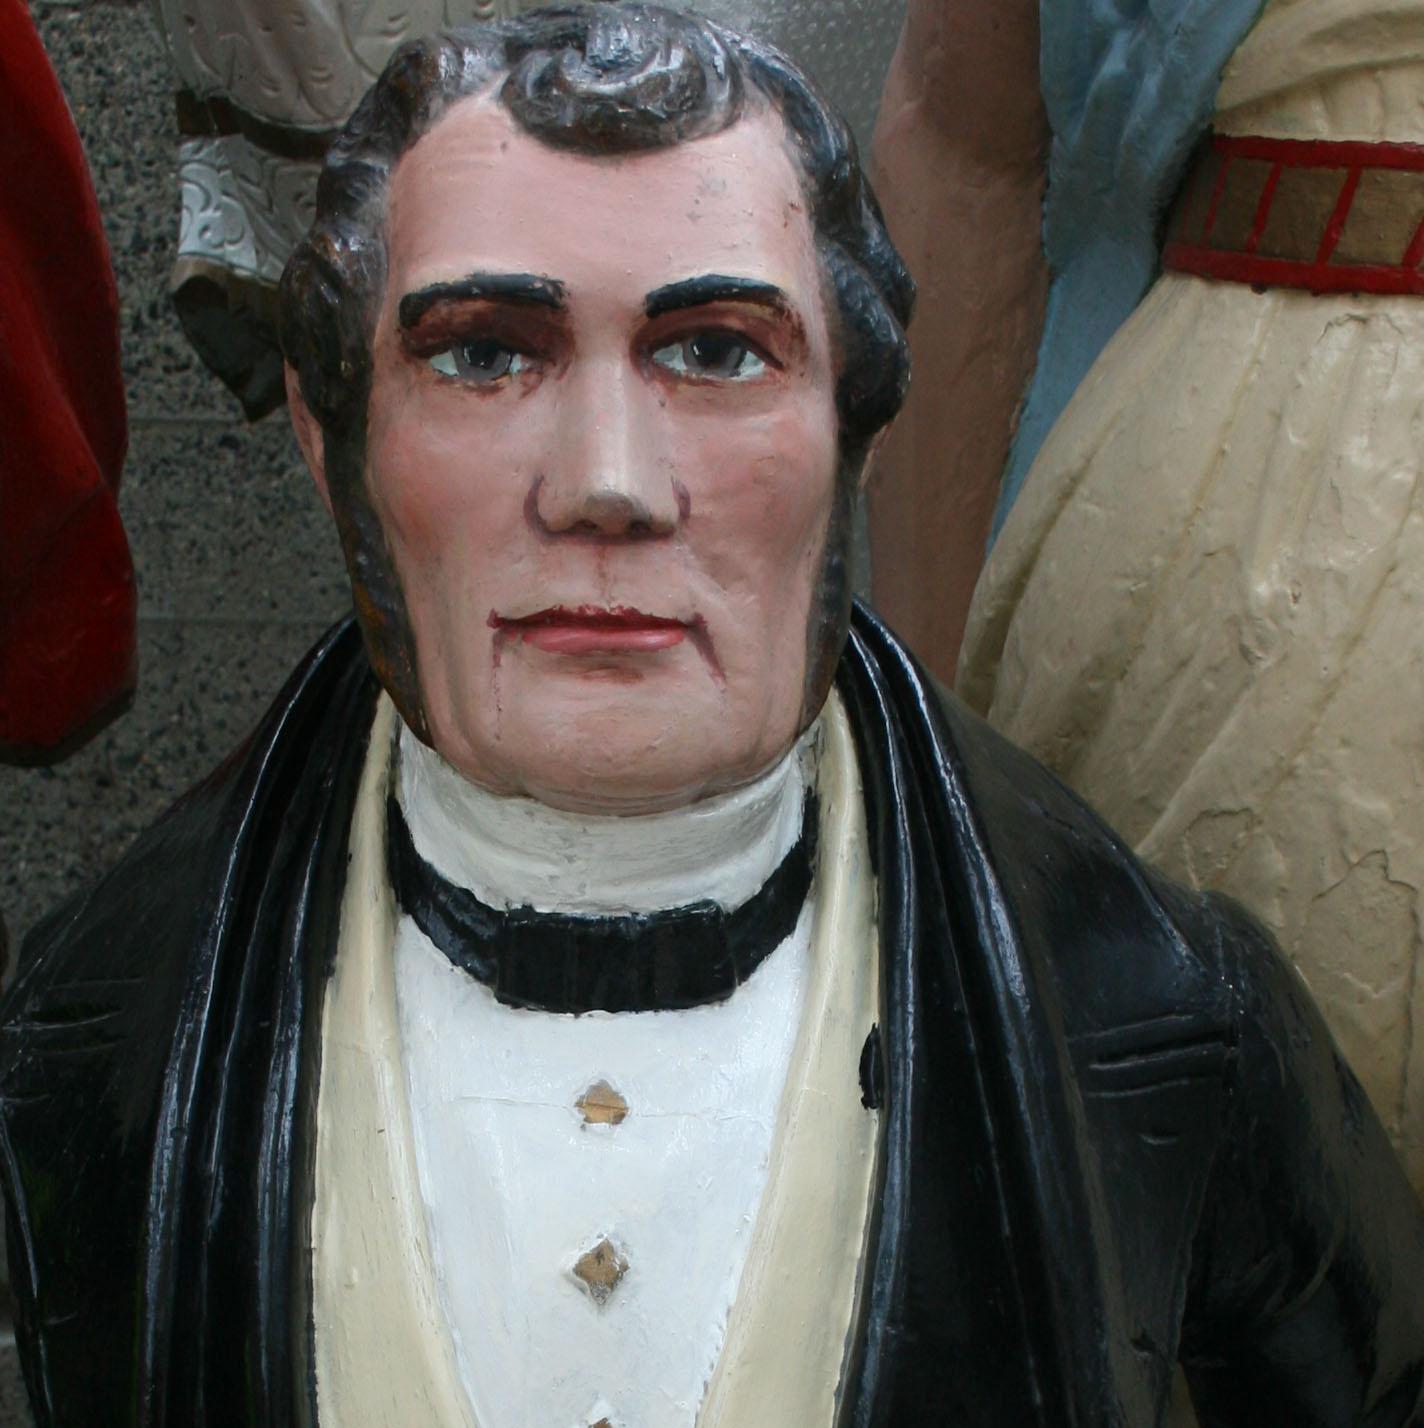 Wilberforce, part of the figurehead collection at Cutty Sark